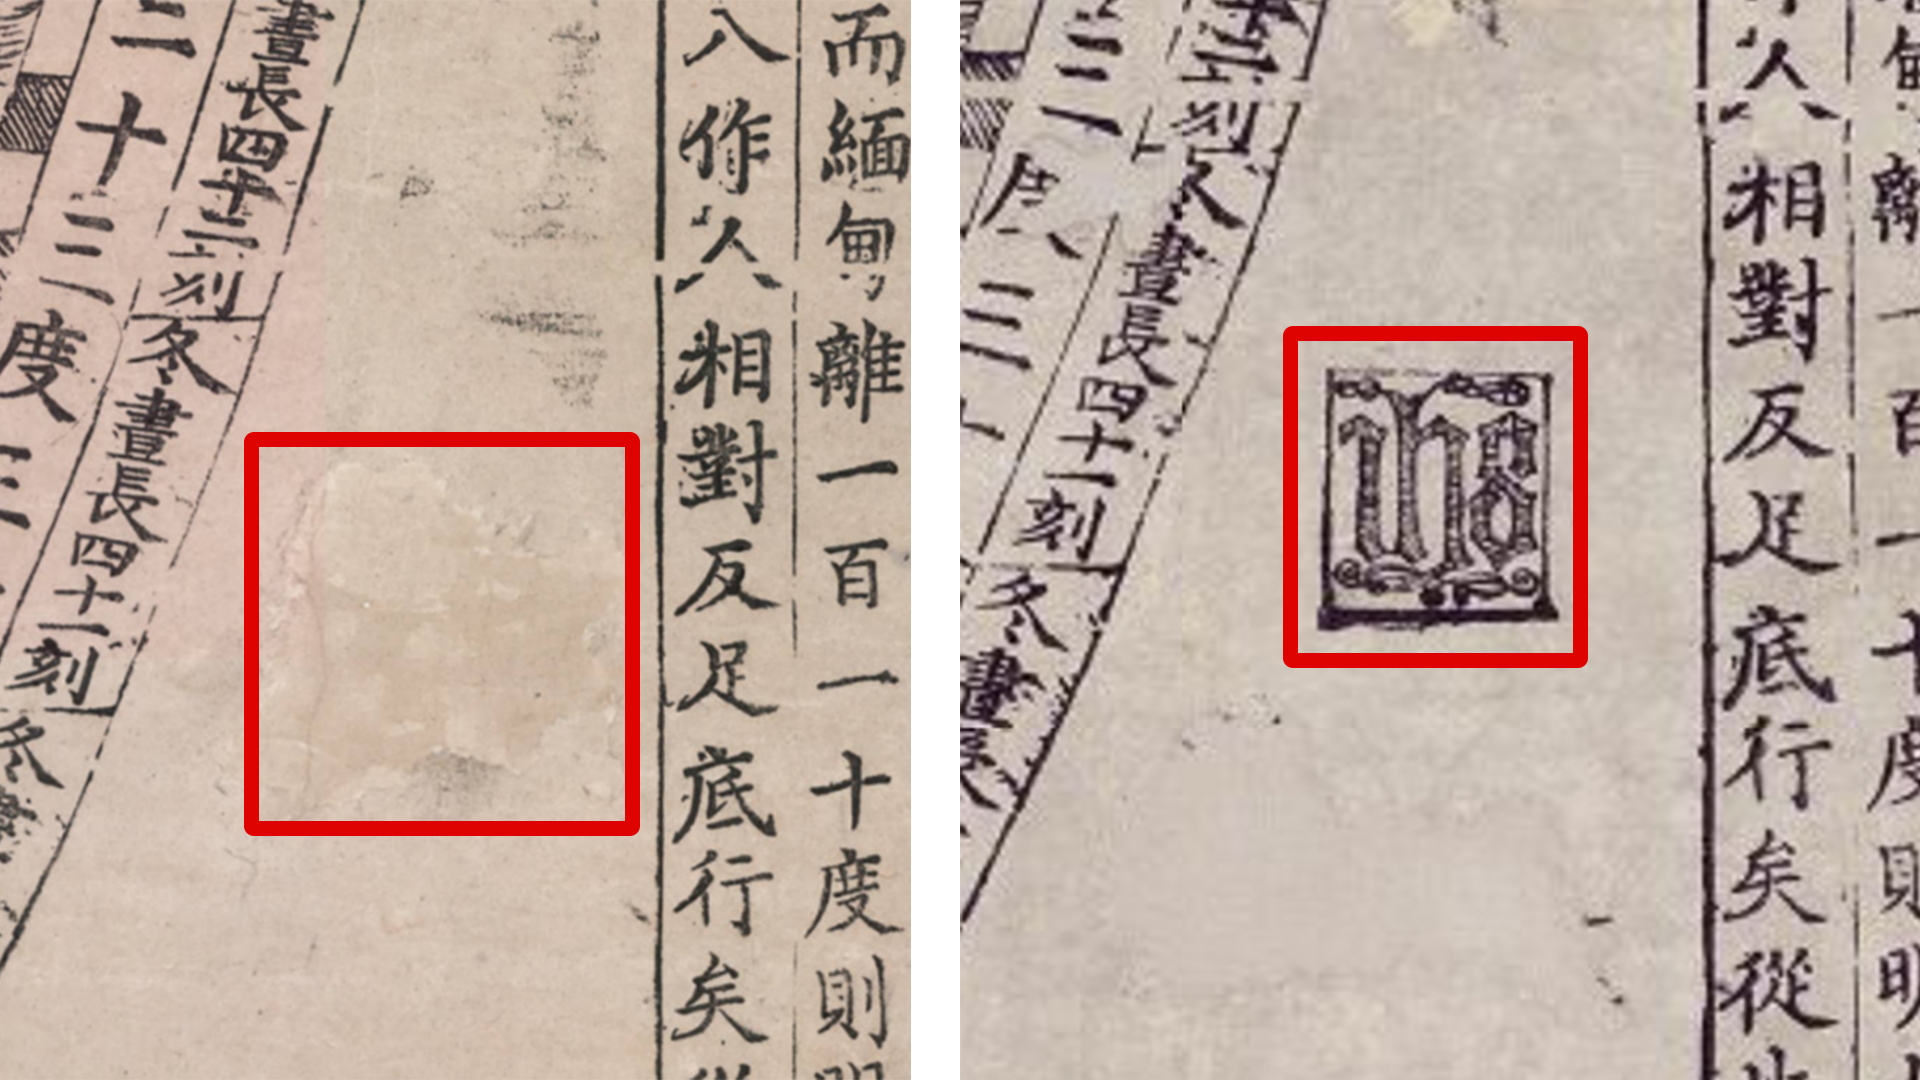 Censorship comparison of details of the <i>Kunyu Wanguo Quantu</i>, James Ford Bell library (left) <br>and Miyagi Prefectural Library (right)